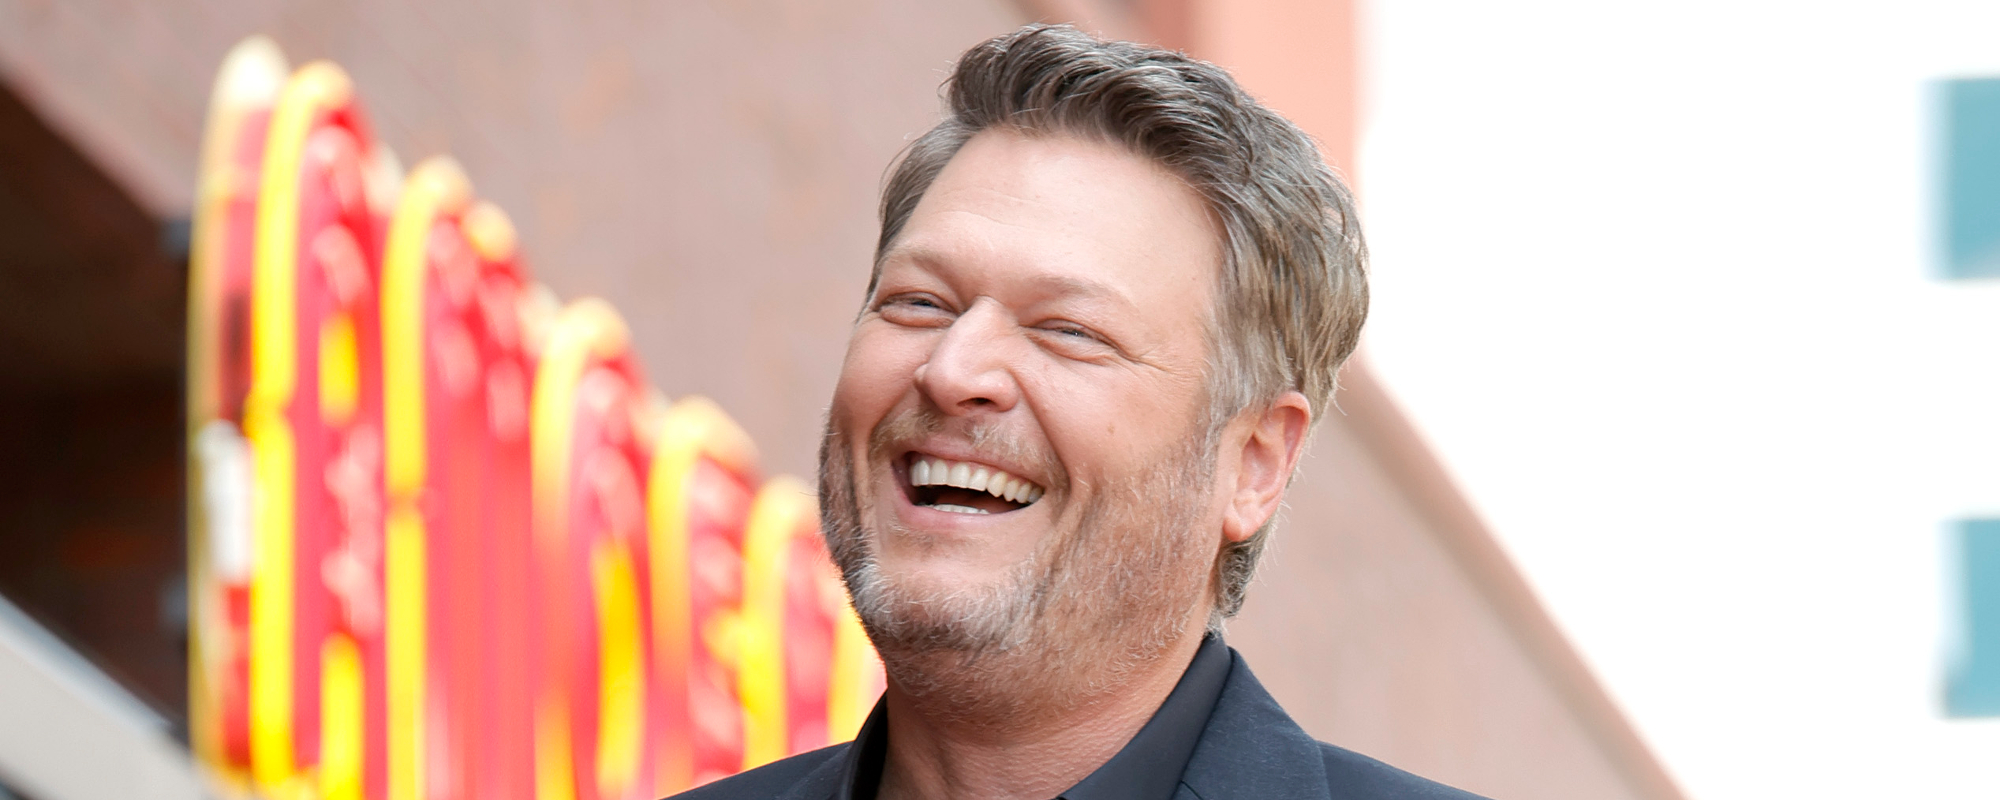 Blake Shelton Opens Up About His New Year’s Resolution to ”Stop Drinking Altogether”